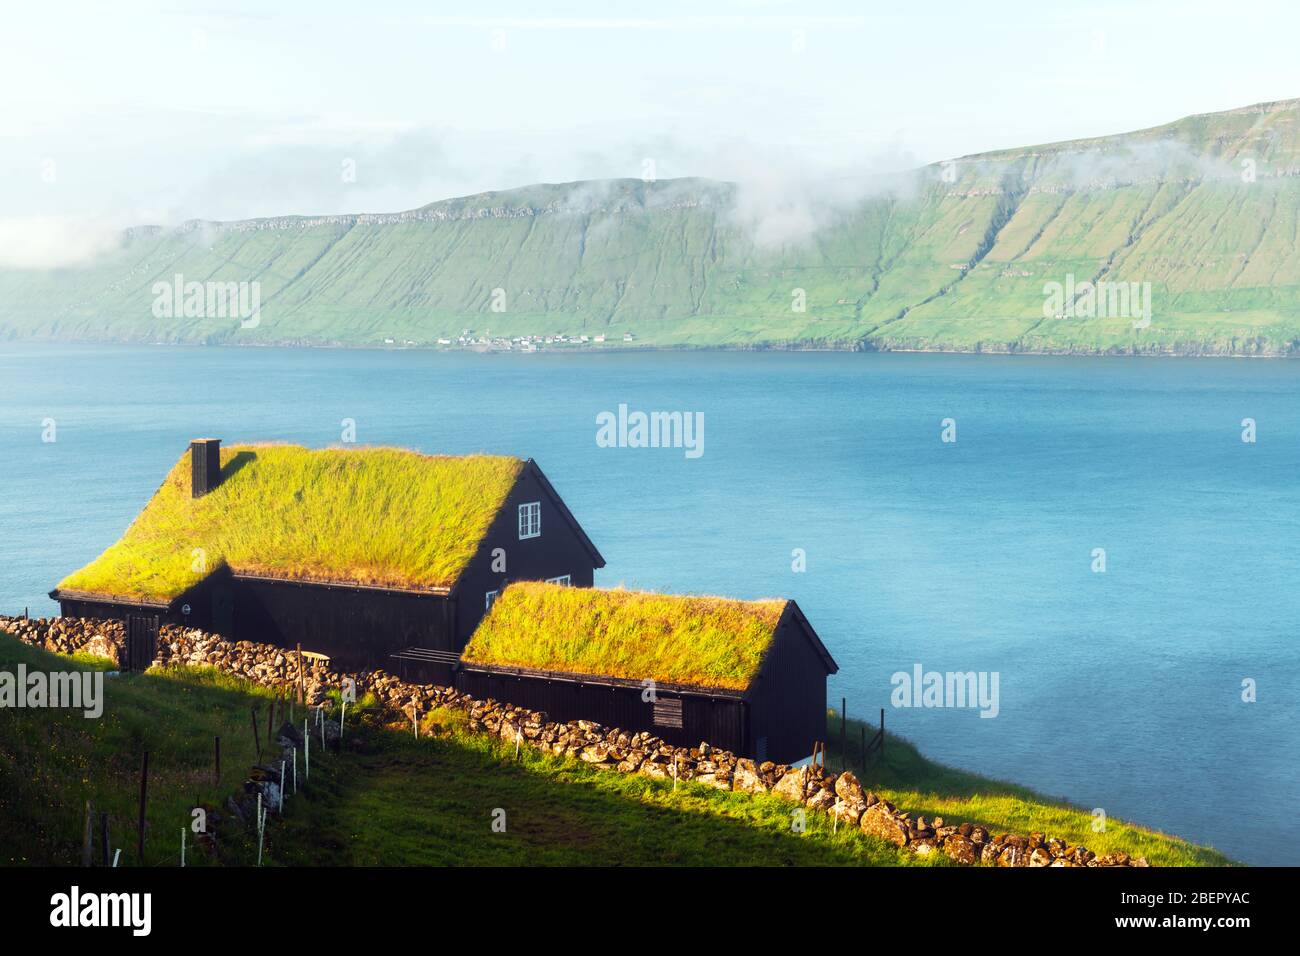 Foggy morning view of a house with grass roof in the Velbastadur village on Streymoy island, Faroe islands, Denmark. Landscape photography Stock Photo